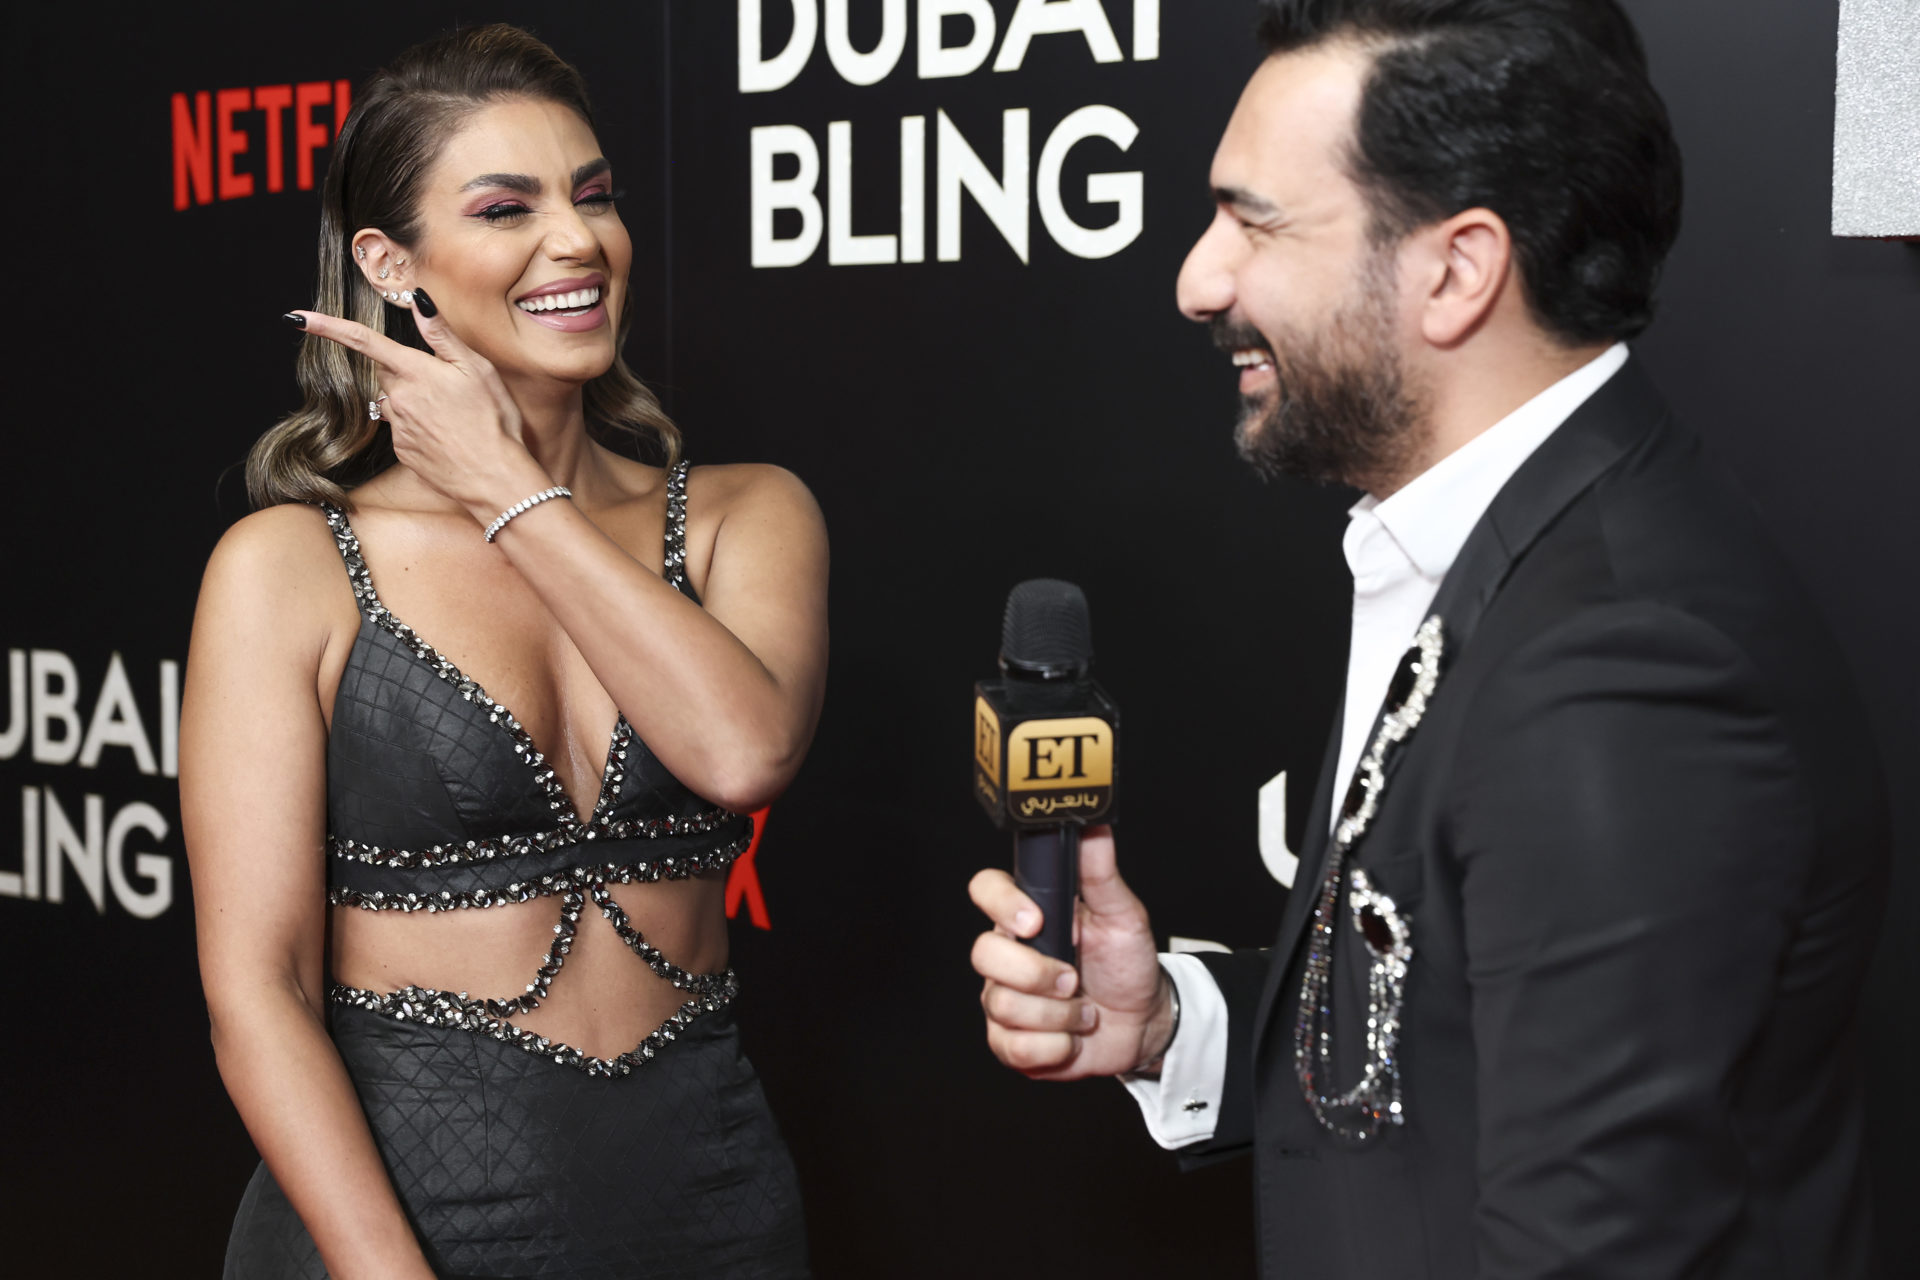 Netflix celebrates the launch of the Arab reality show 